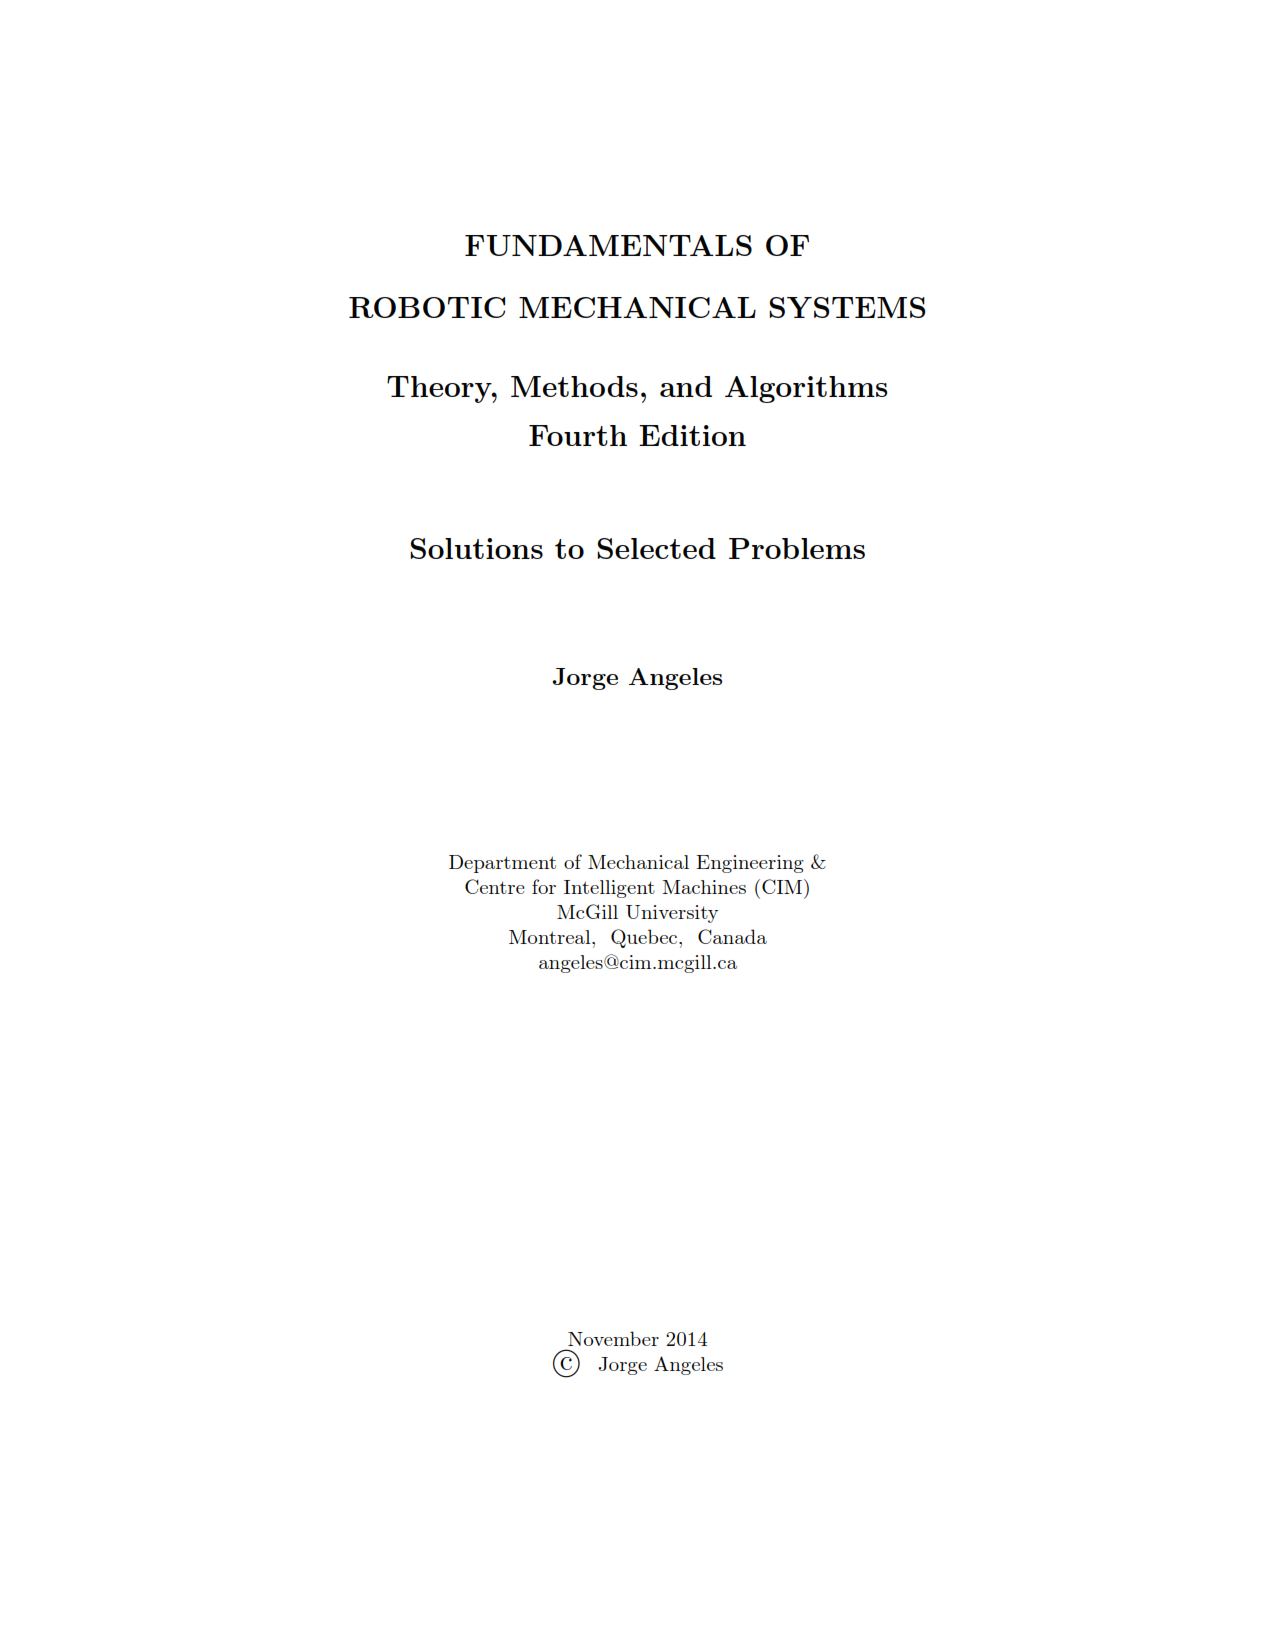 download free Fundamentals of Robotic Mechanical Systems : Theory , Methods , and Algorithms 4th edition Solution manual pdf